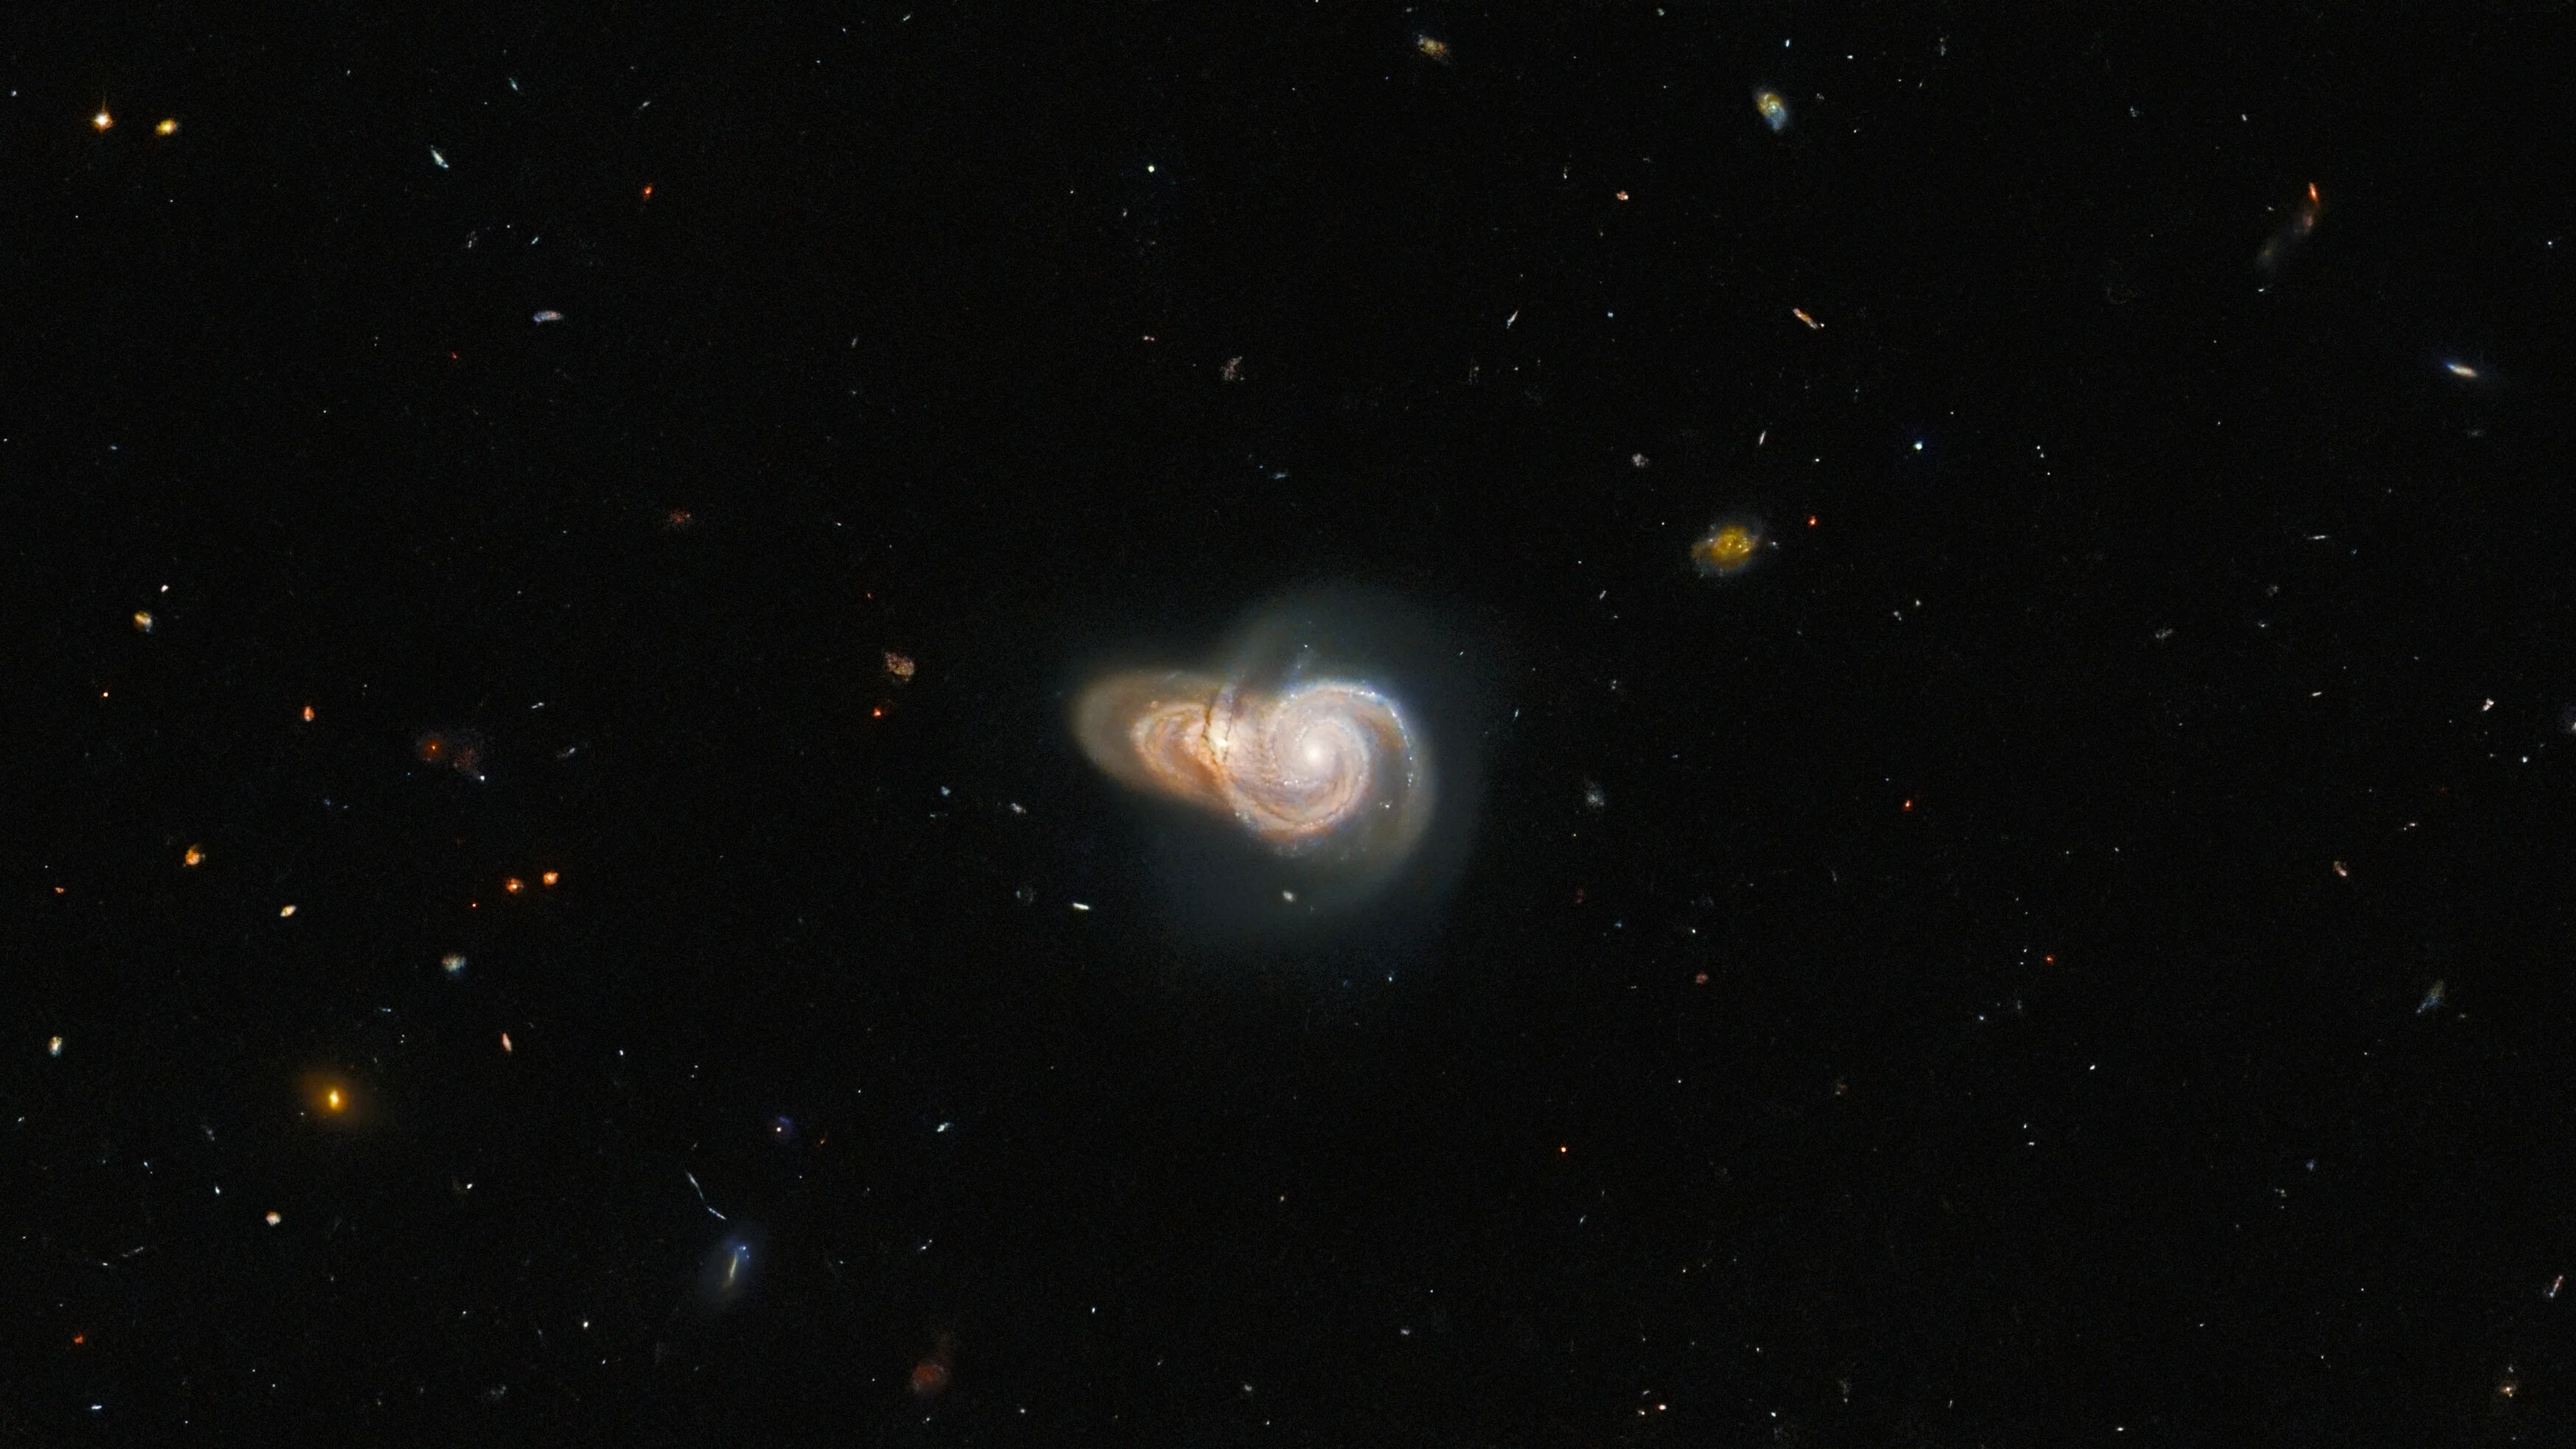 Center of image holds two spiral galaxies. the foreground galaxy is face-on, while the one behind it is at a slight angle. both appear yellow-gold with streams of bright white stars.